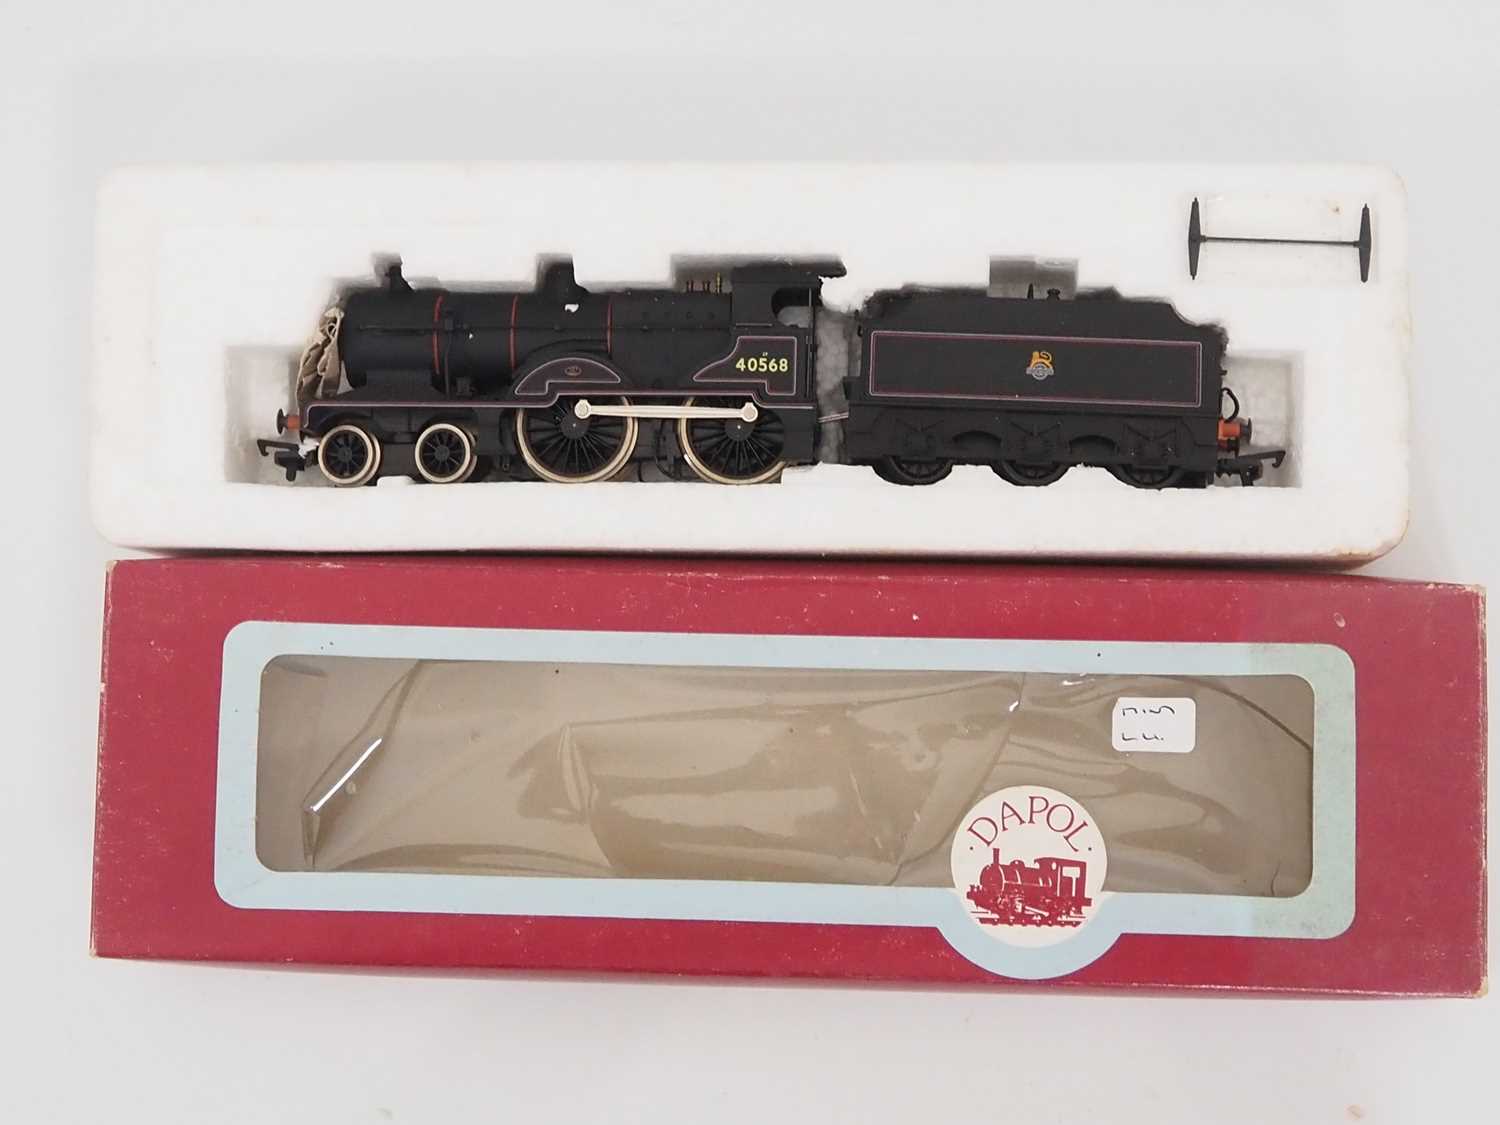 A group of OO gauge steam locos by BACHMANN, DAPOL, MAINLINE and HORNBY all in various BR liveries - - Image 4 of 7